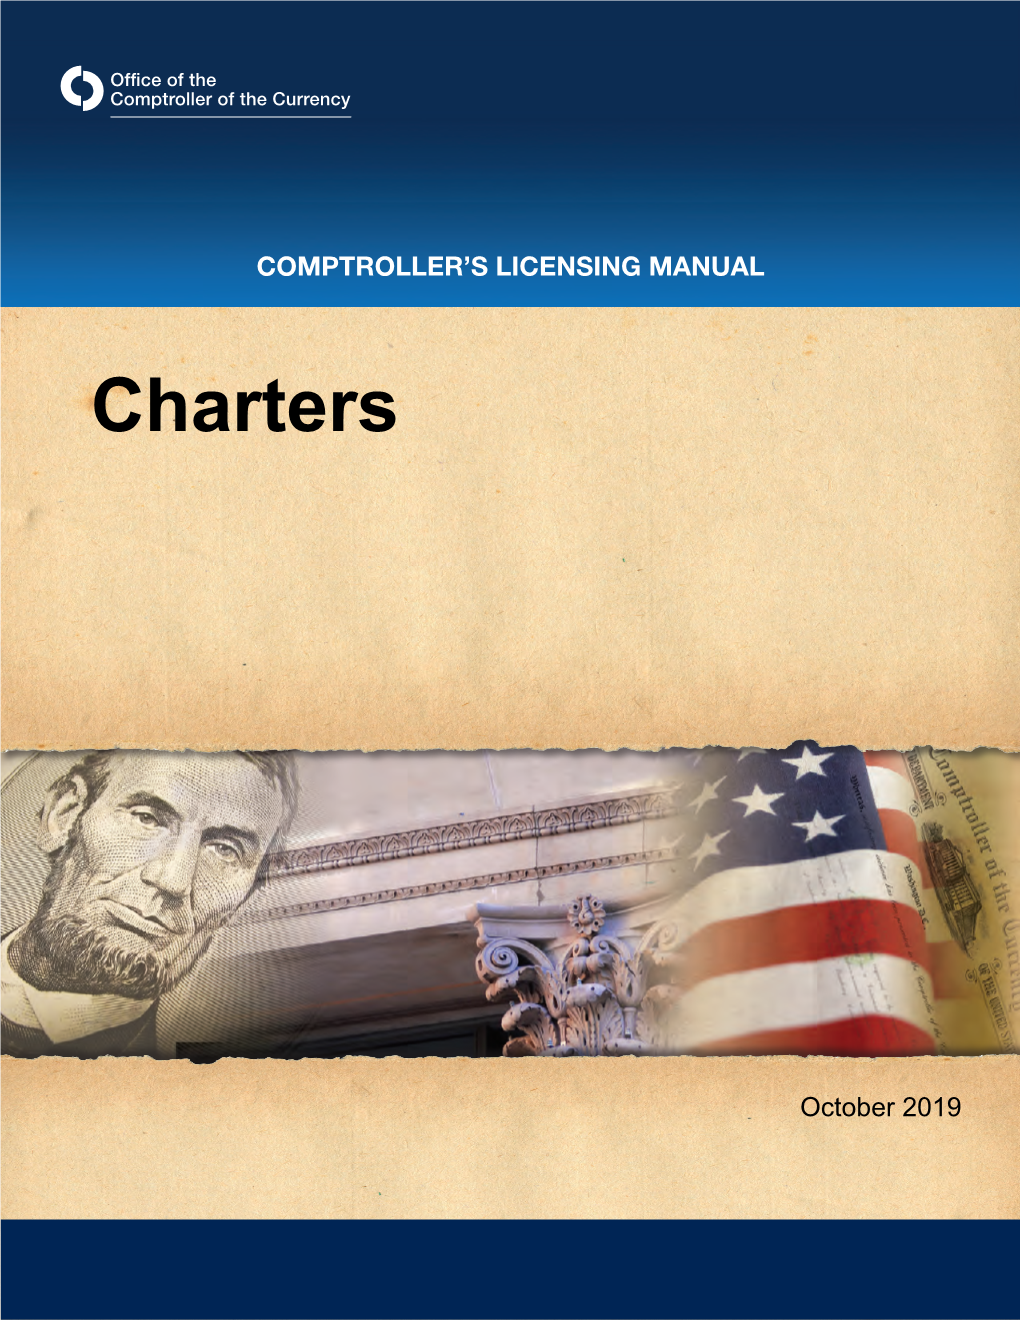 Charters, Comptroller's Licensing Manual